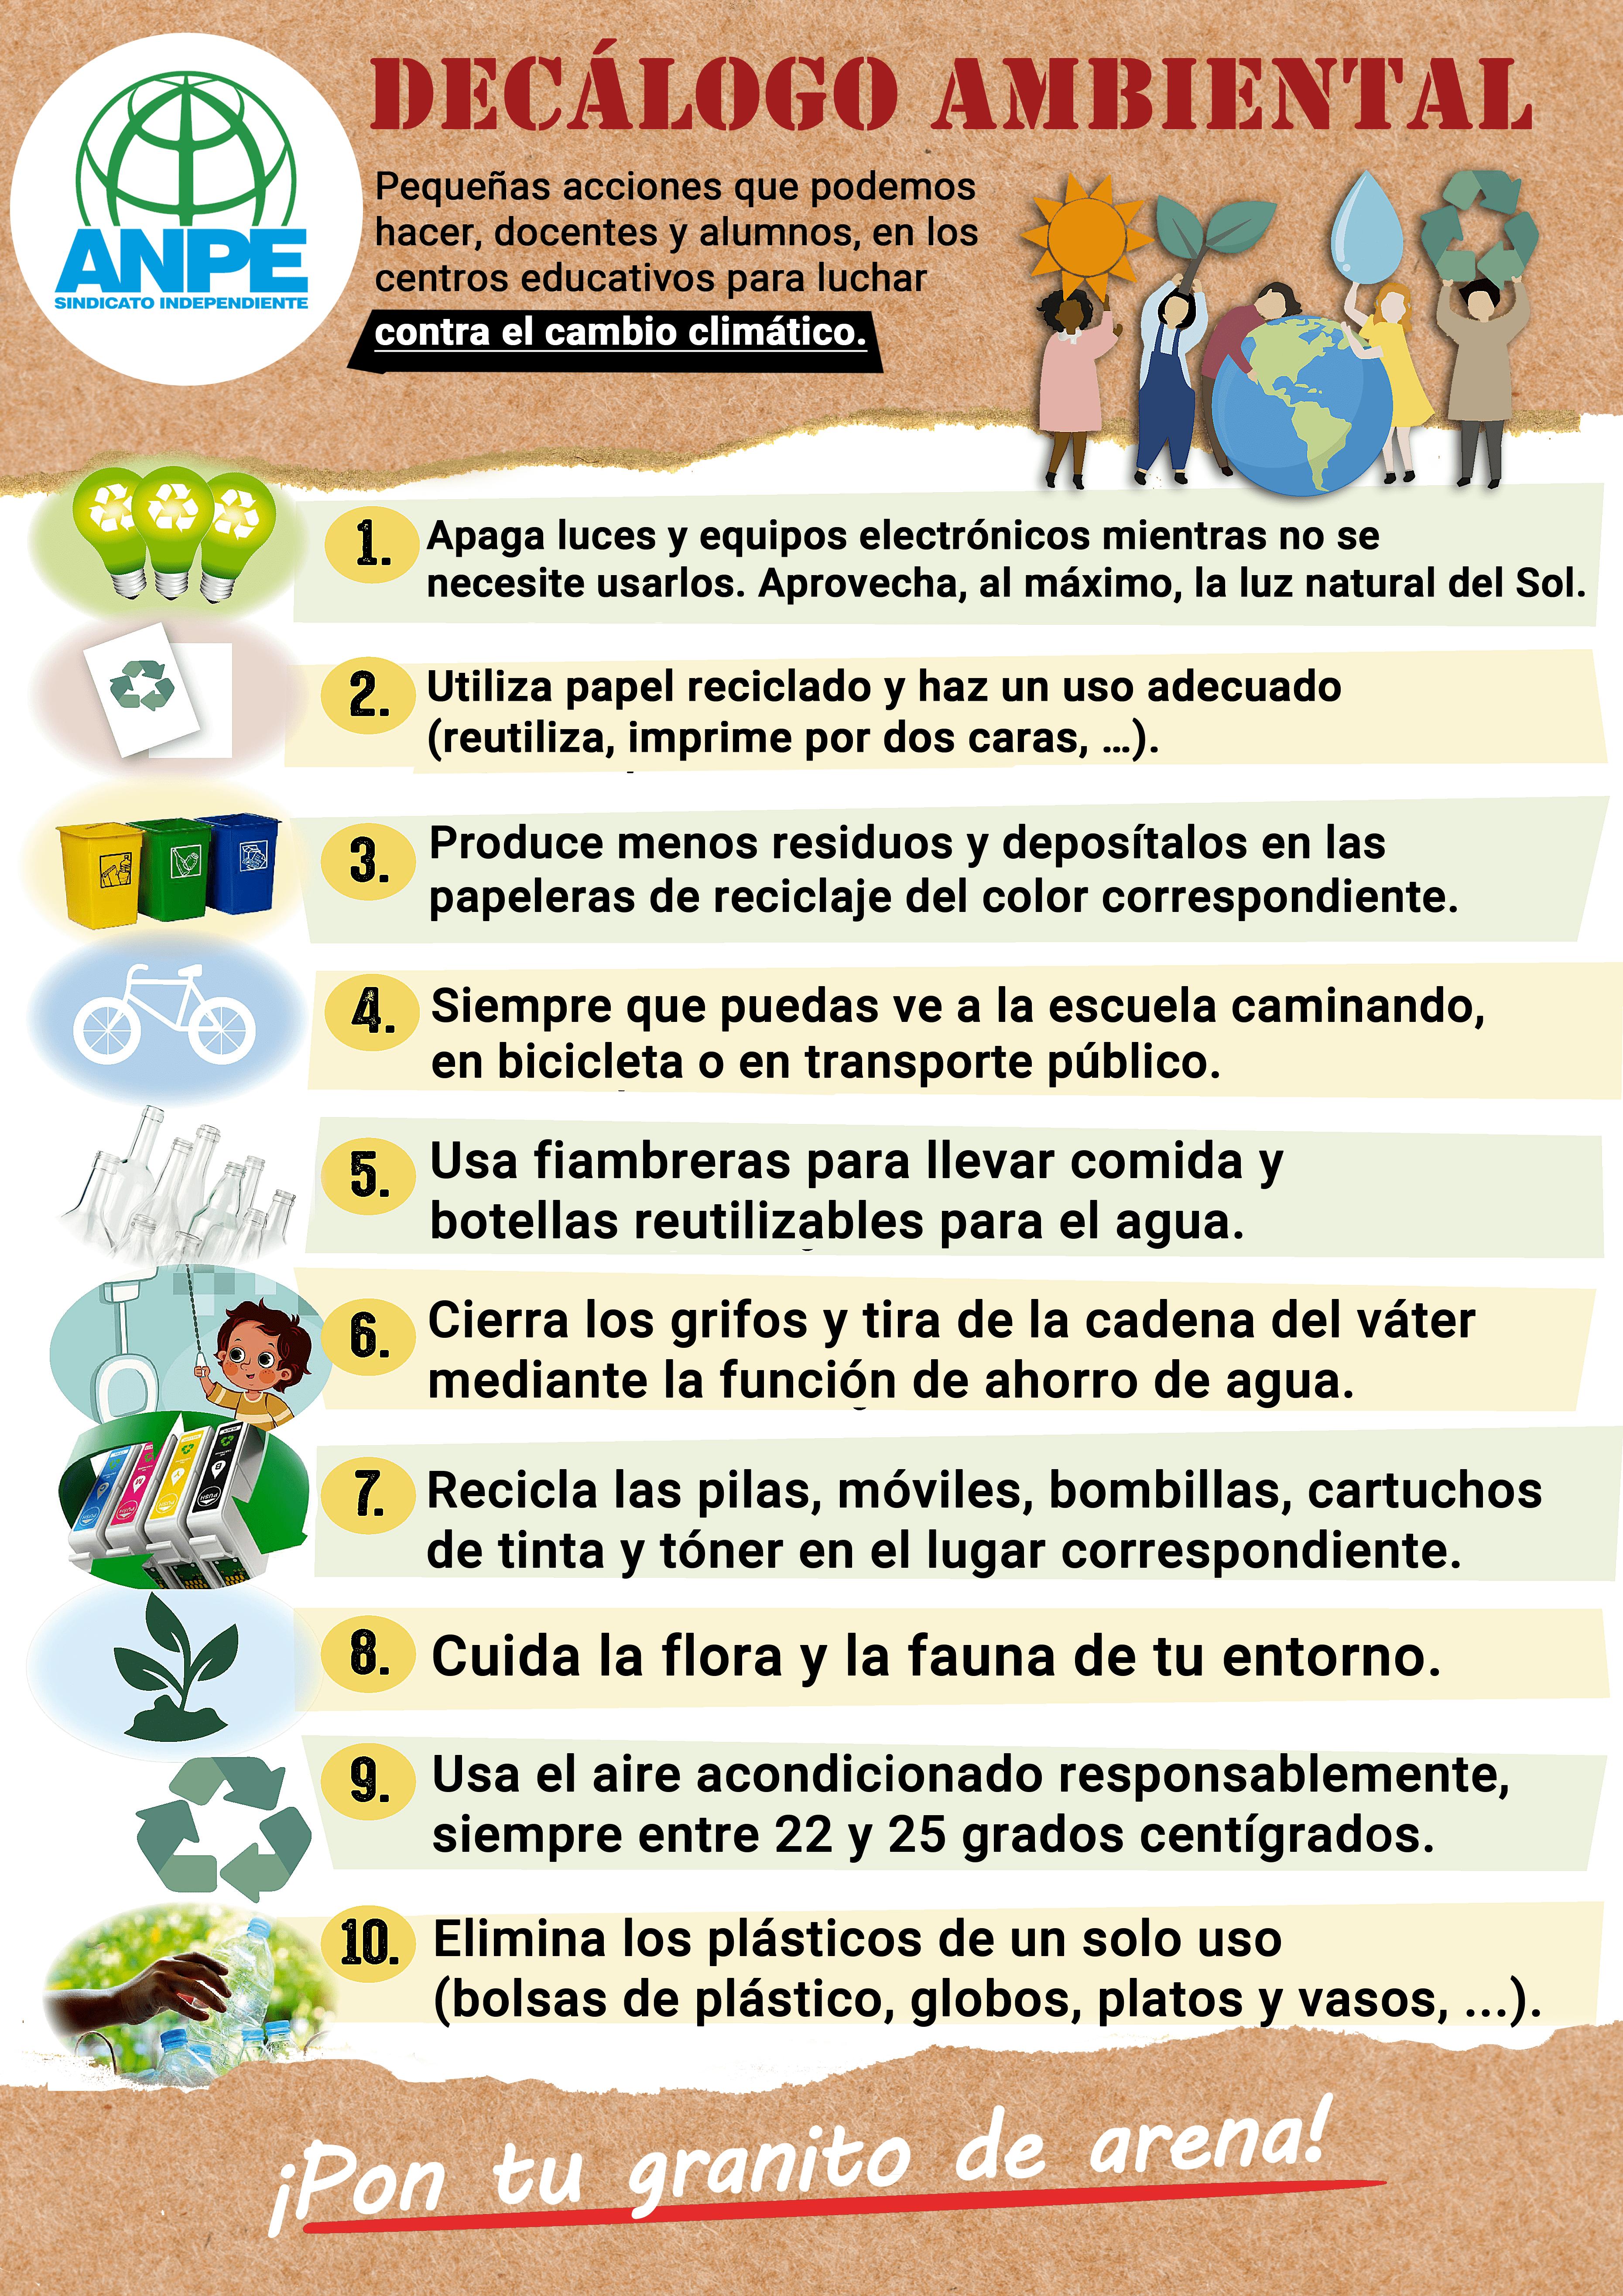 decalogo-ambiental-anpe-web